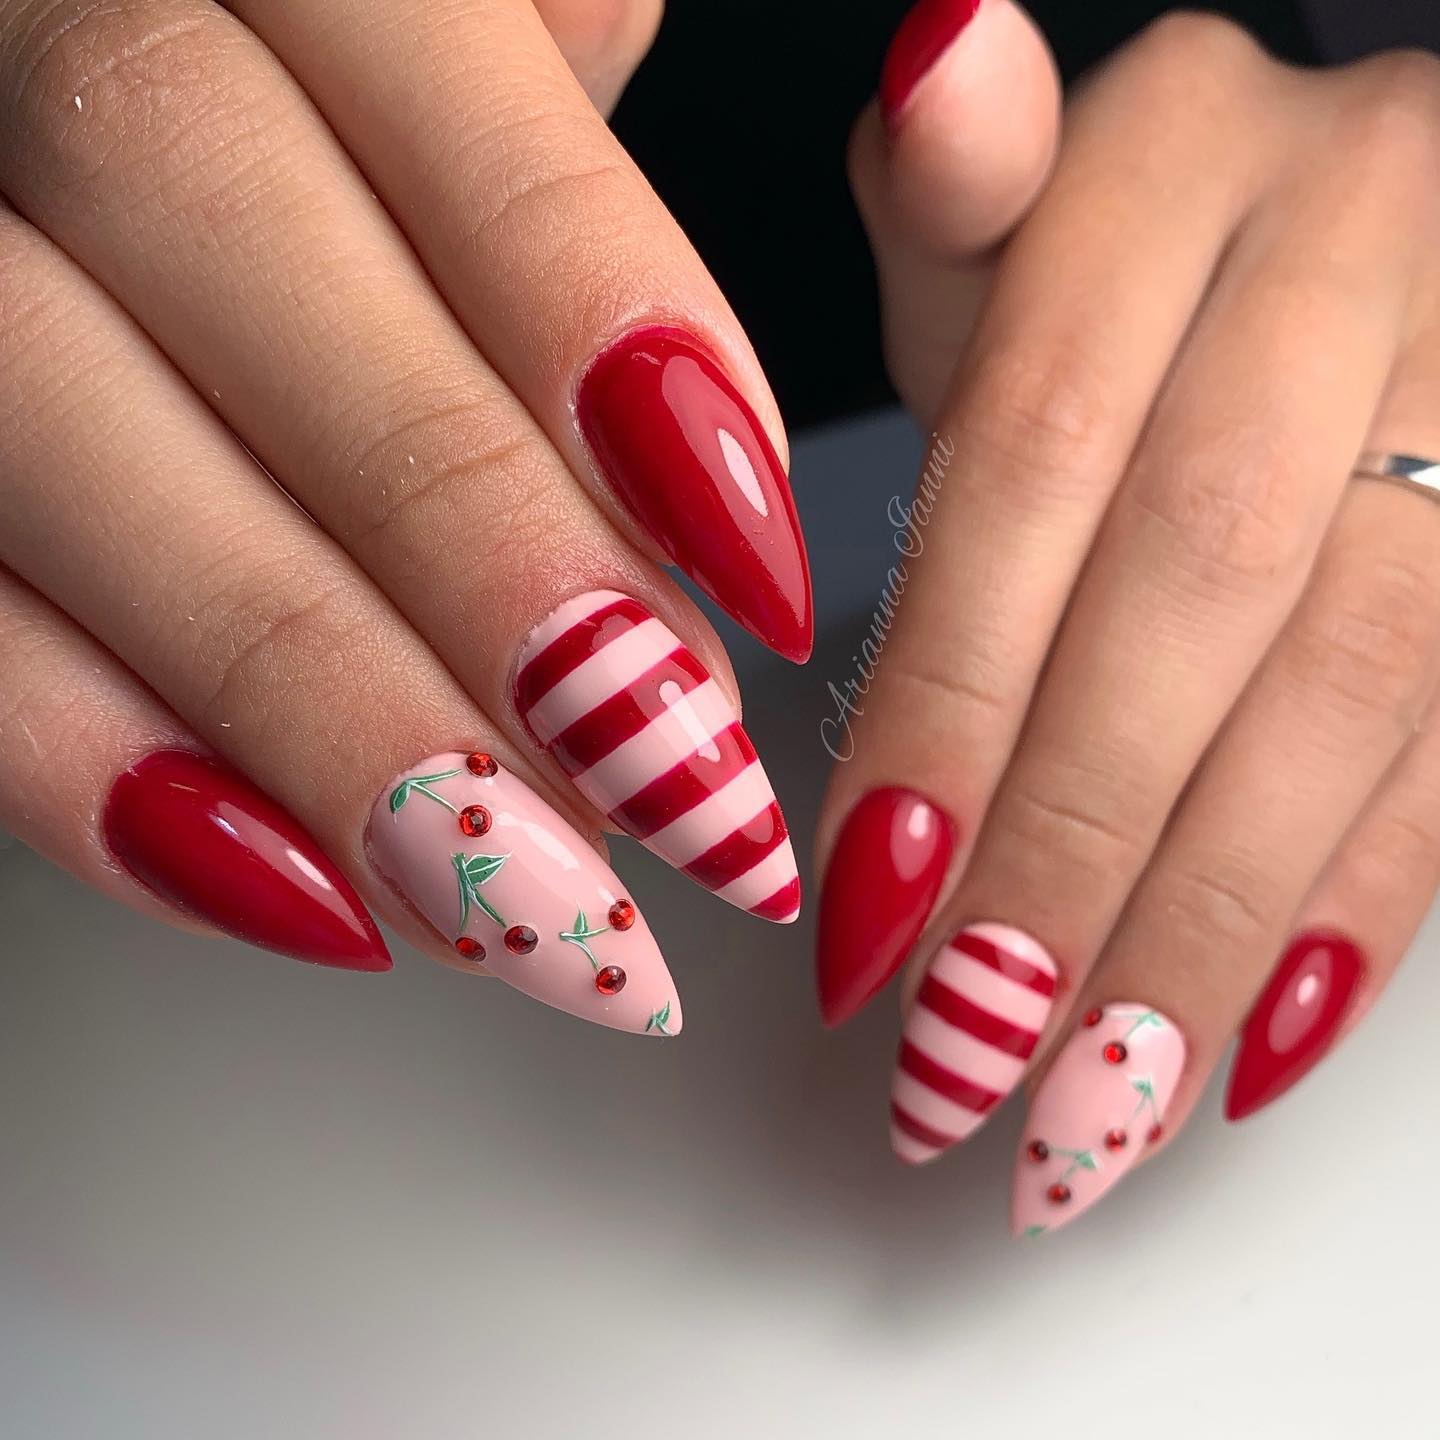 Red Manicure with Cherry and Rhinestones